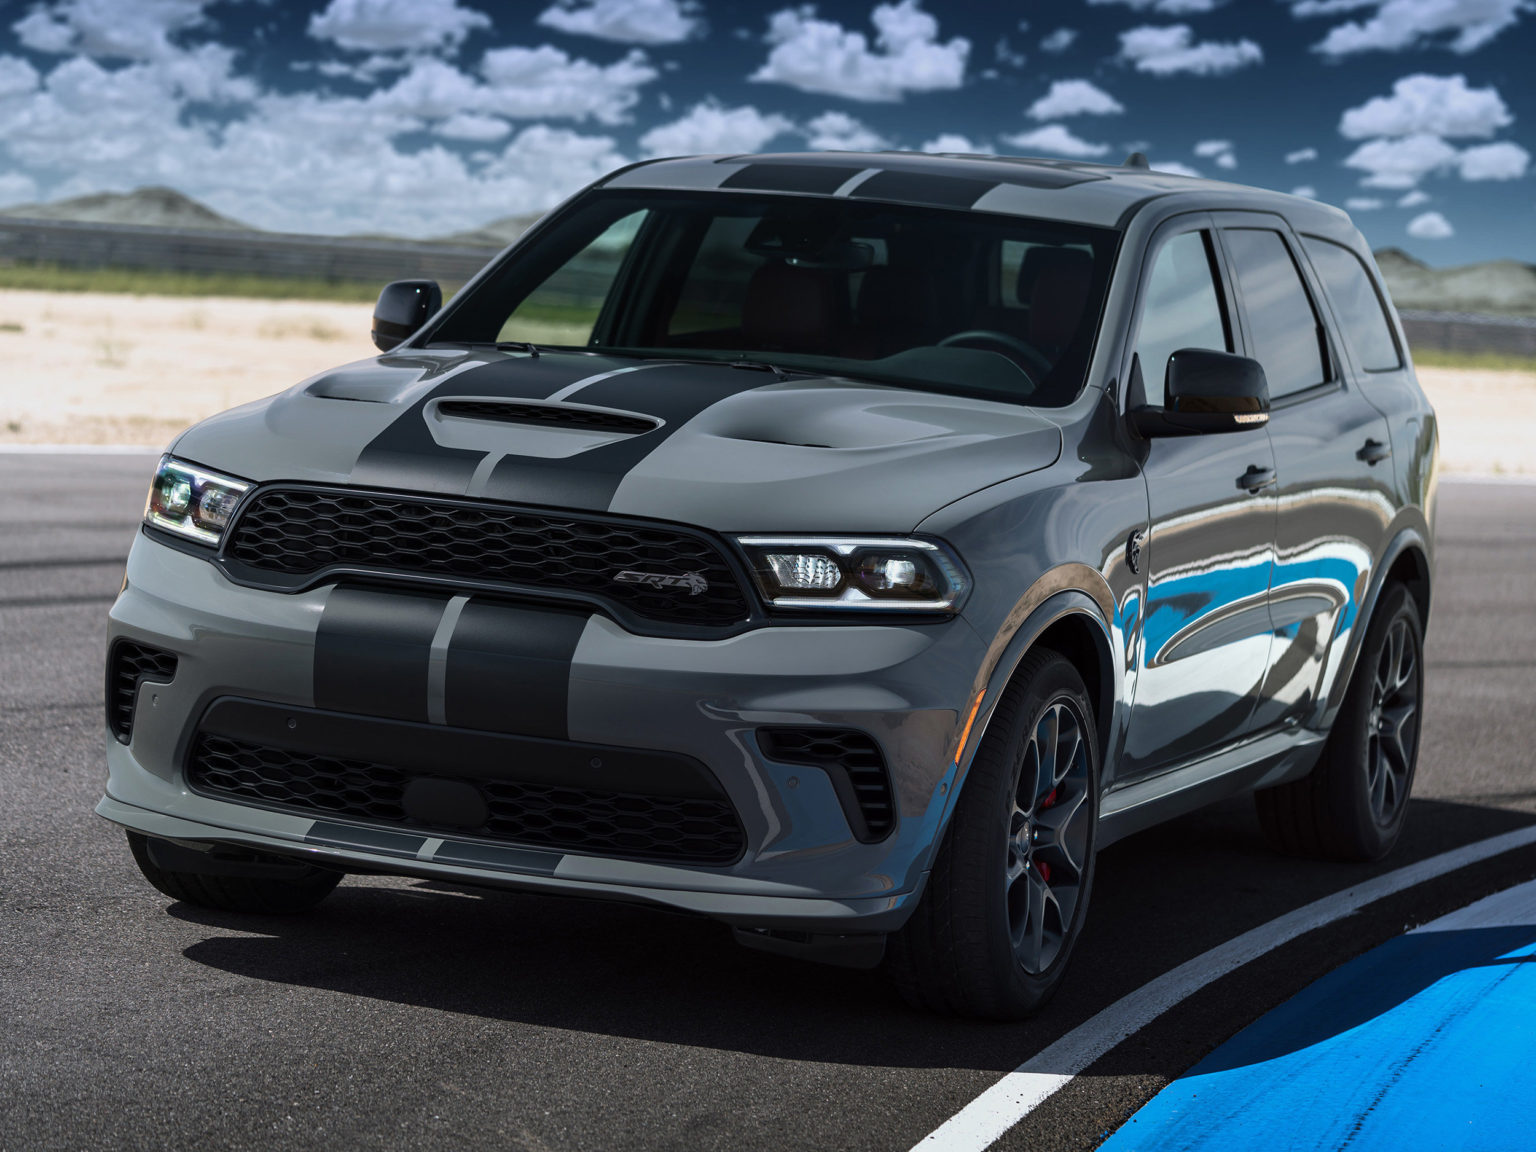 Dodge is adding a Hellcat version of its SUV to the lineup for one year only.